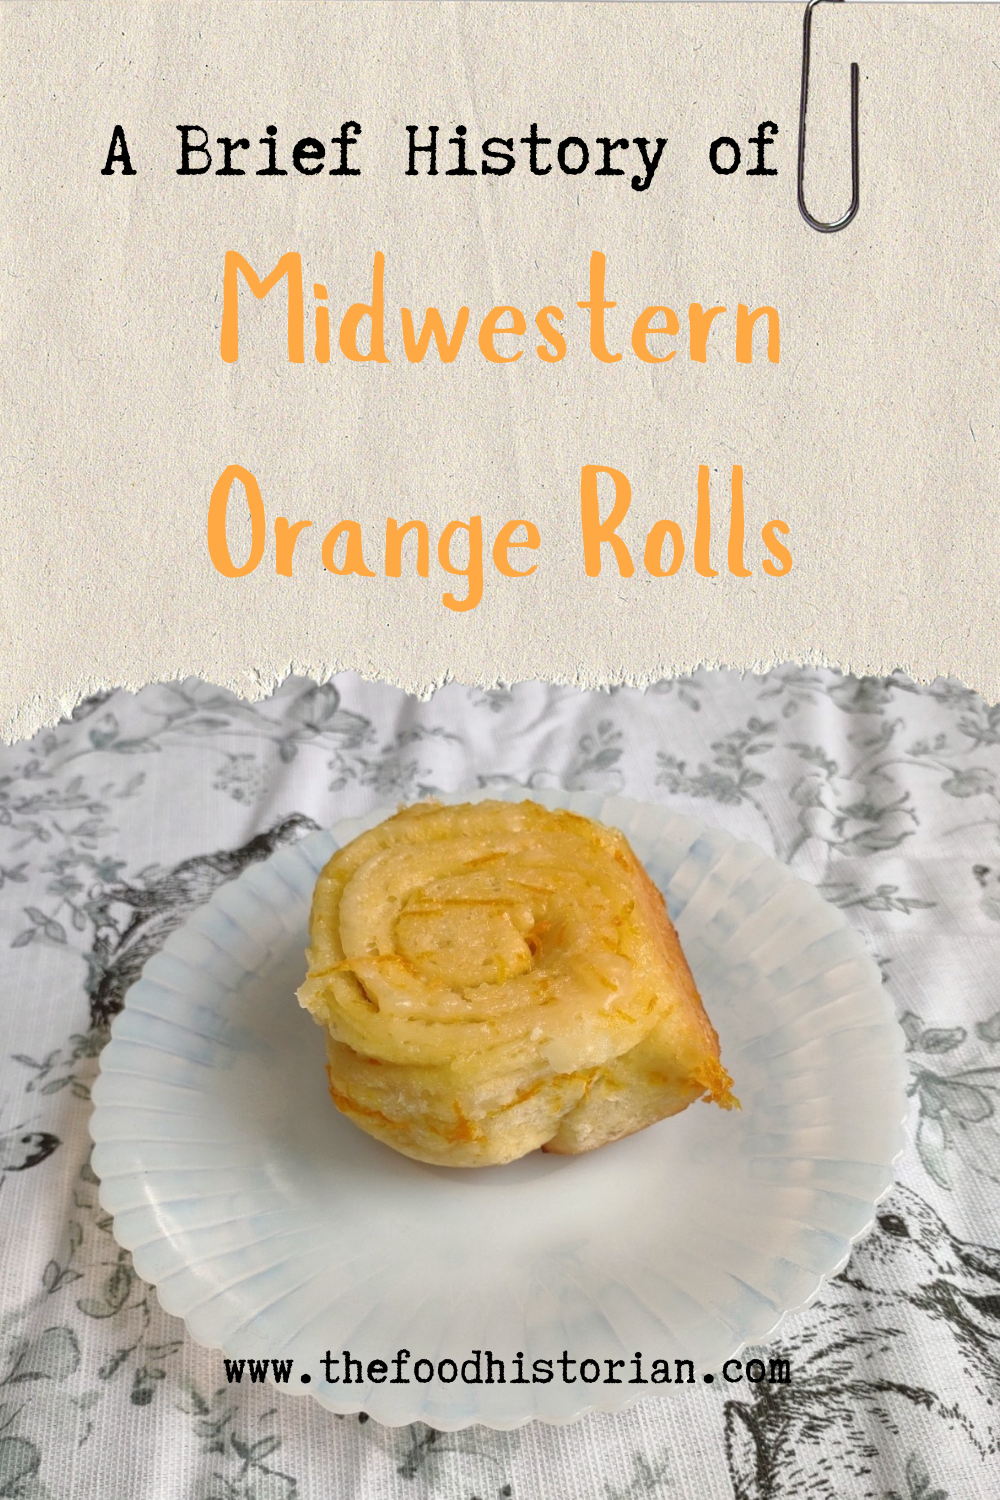 http://www.thefoodhistorian.com/uploads/2/5/8/6/25860210/a-brief-history-of-midwestern-orange-rolls_orig.png